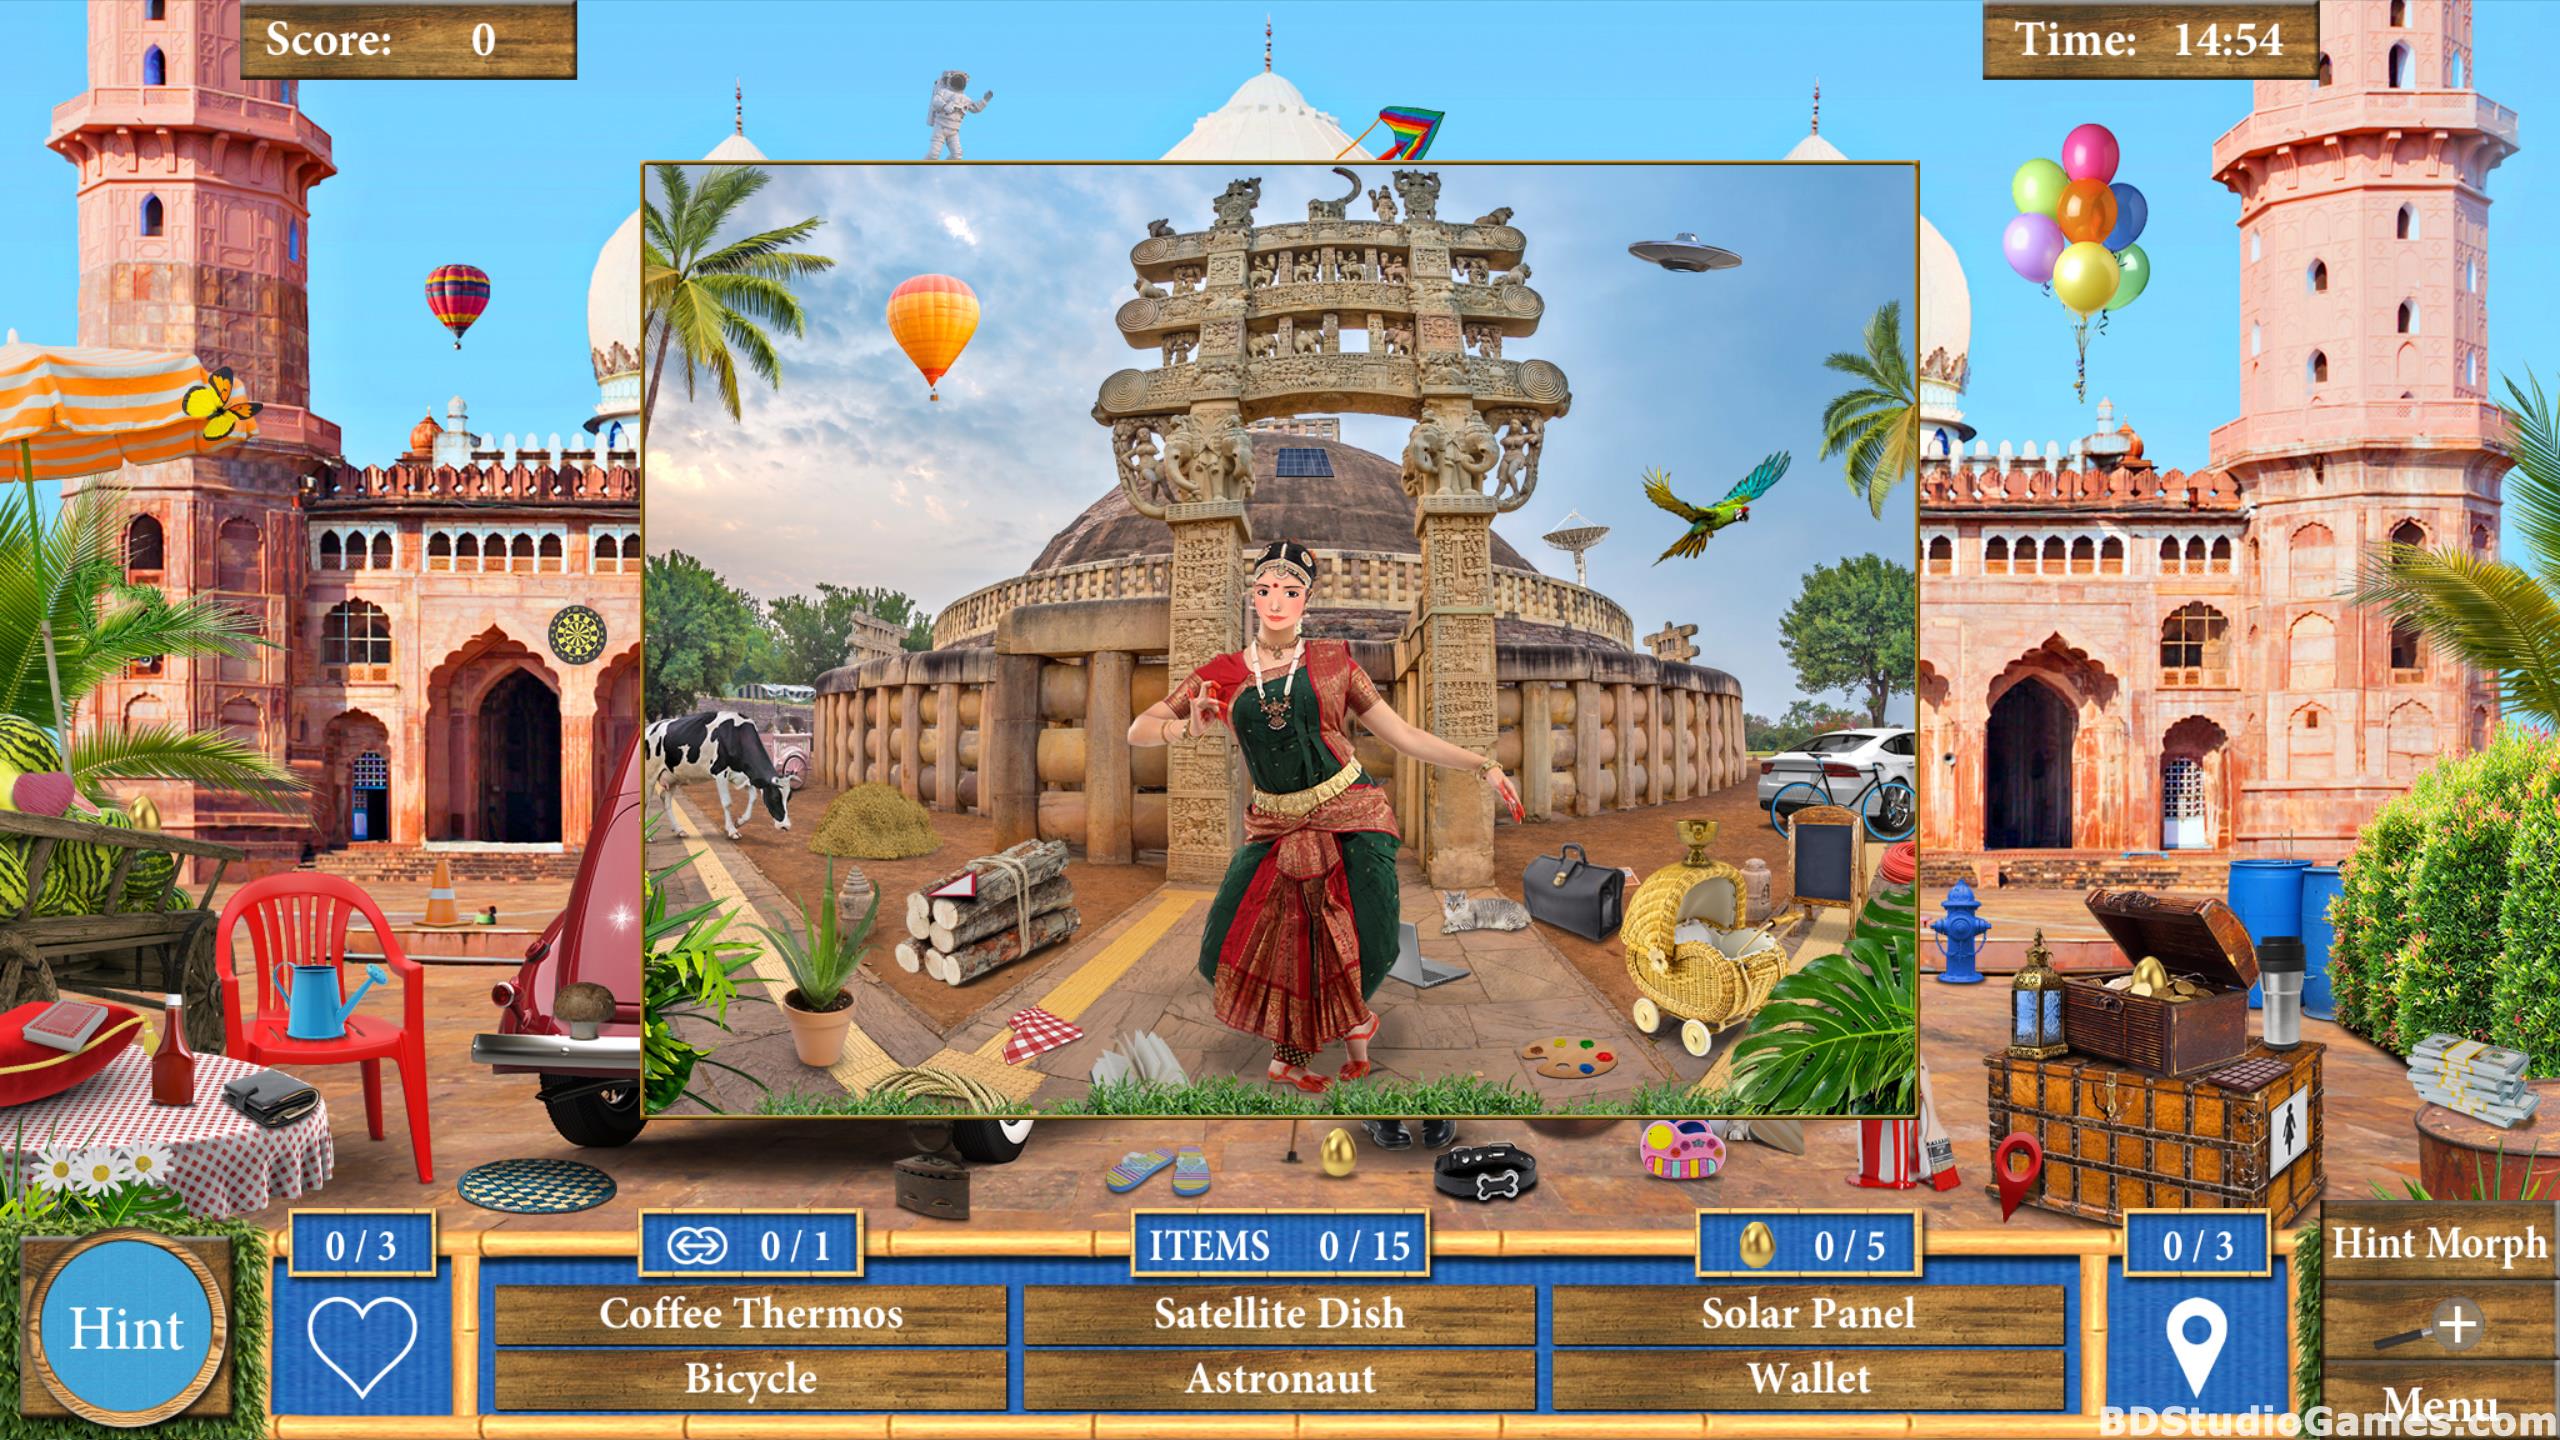 Around the World 2 with the Johnson Family Free Download Screenshots 14